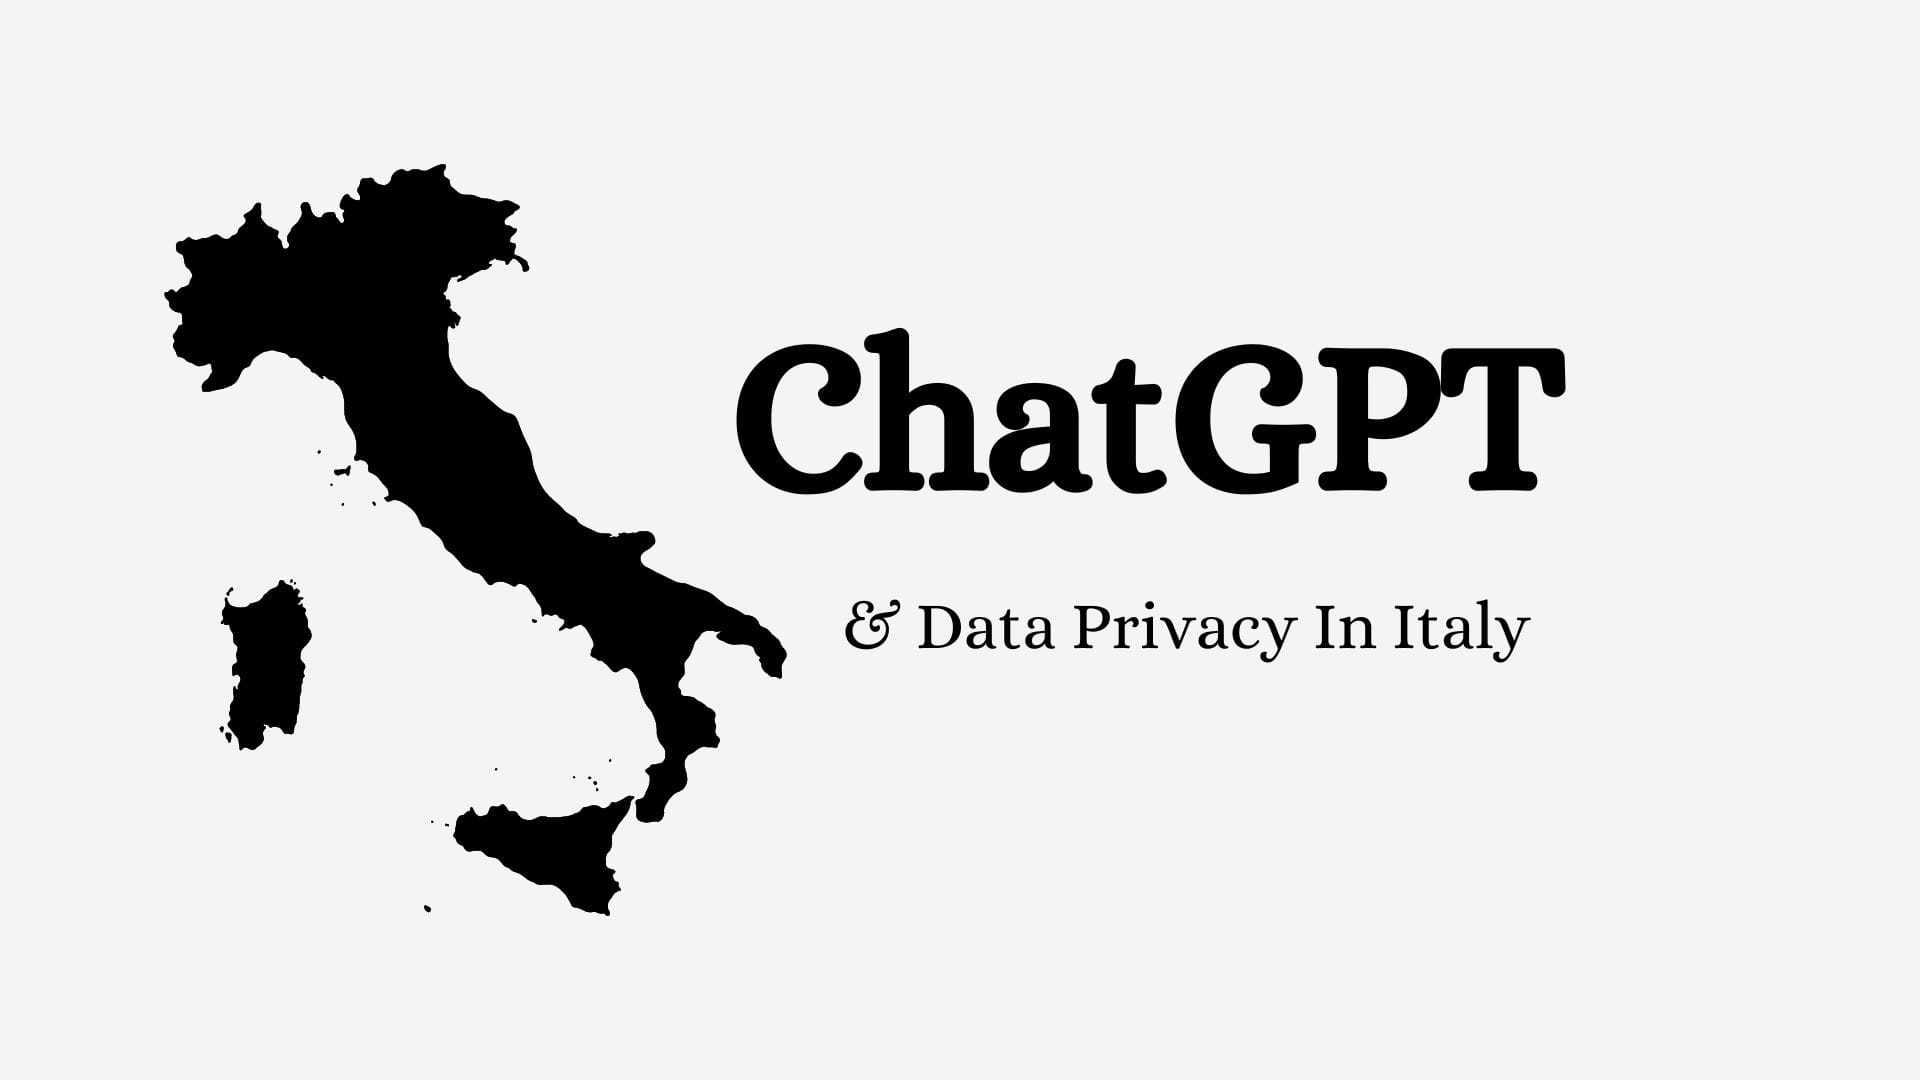 Most recently, we saw Italy ban ChatGPT, which became the first western country to ban the AI ​​chatbot.